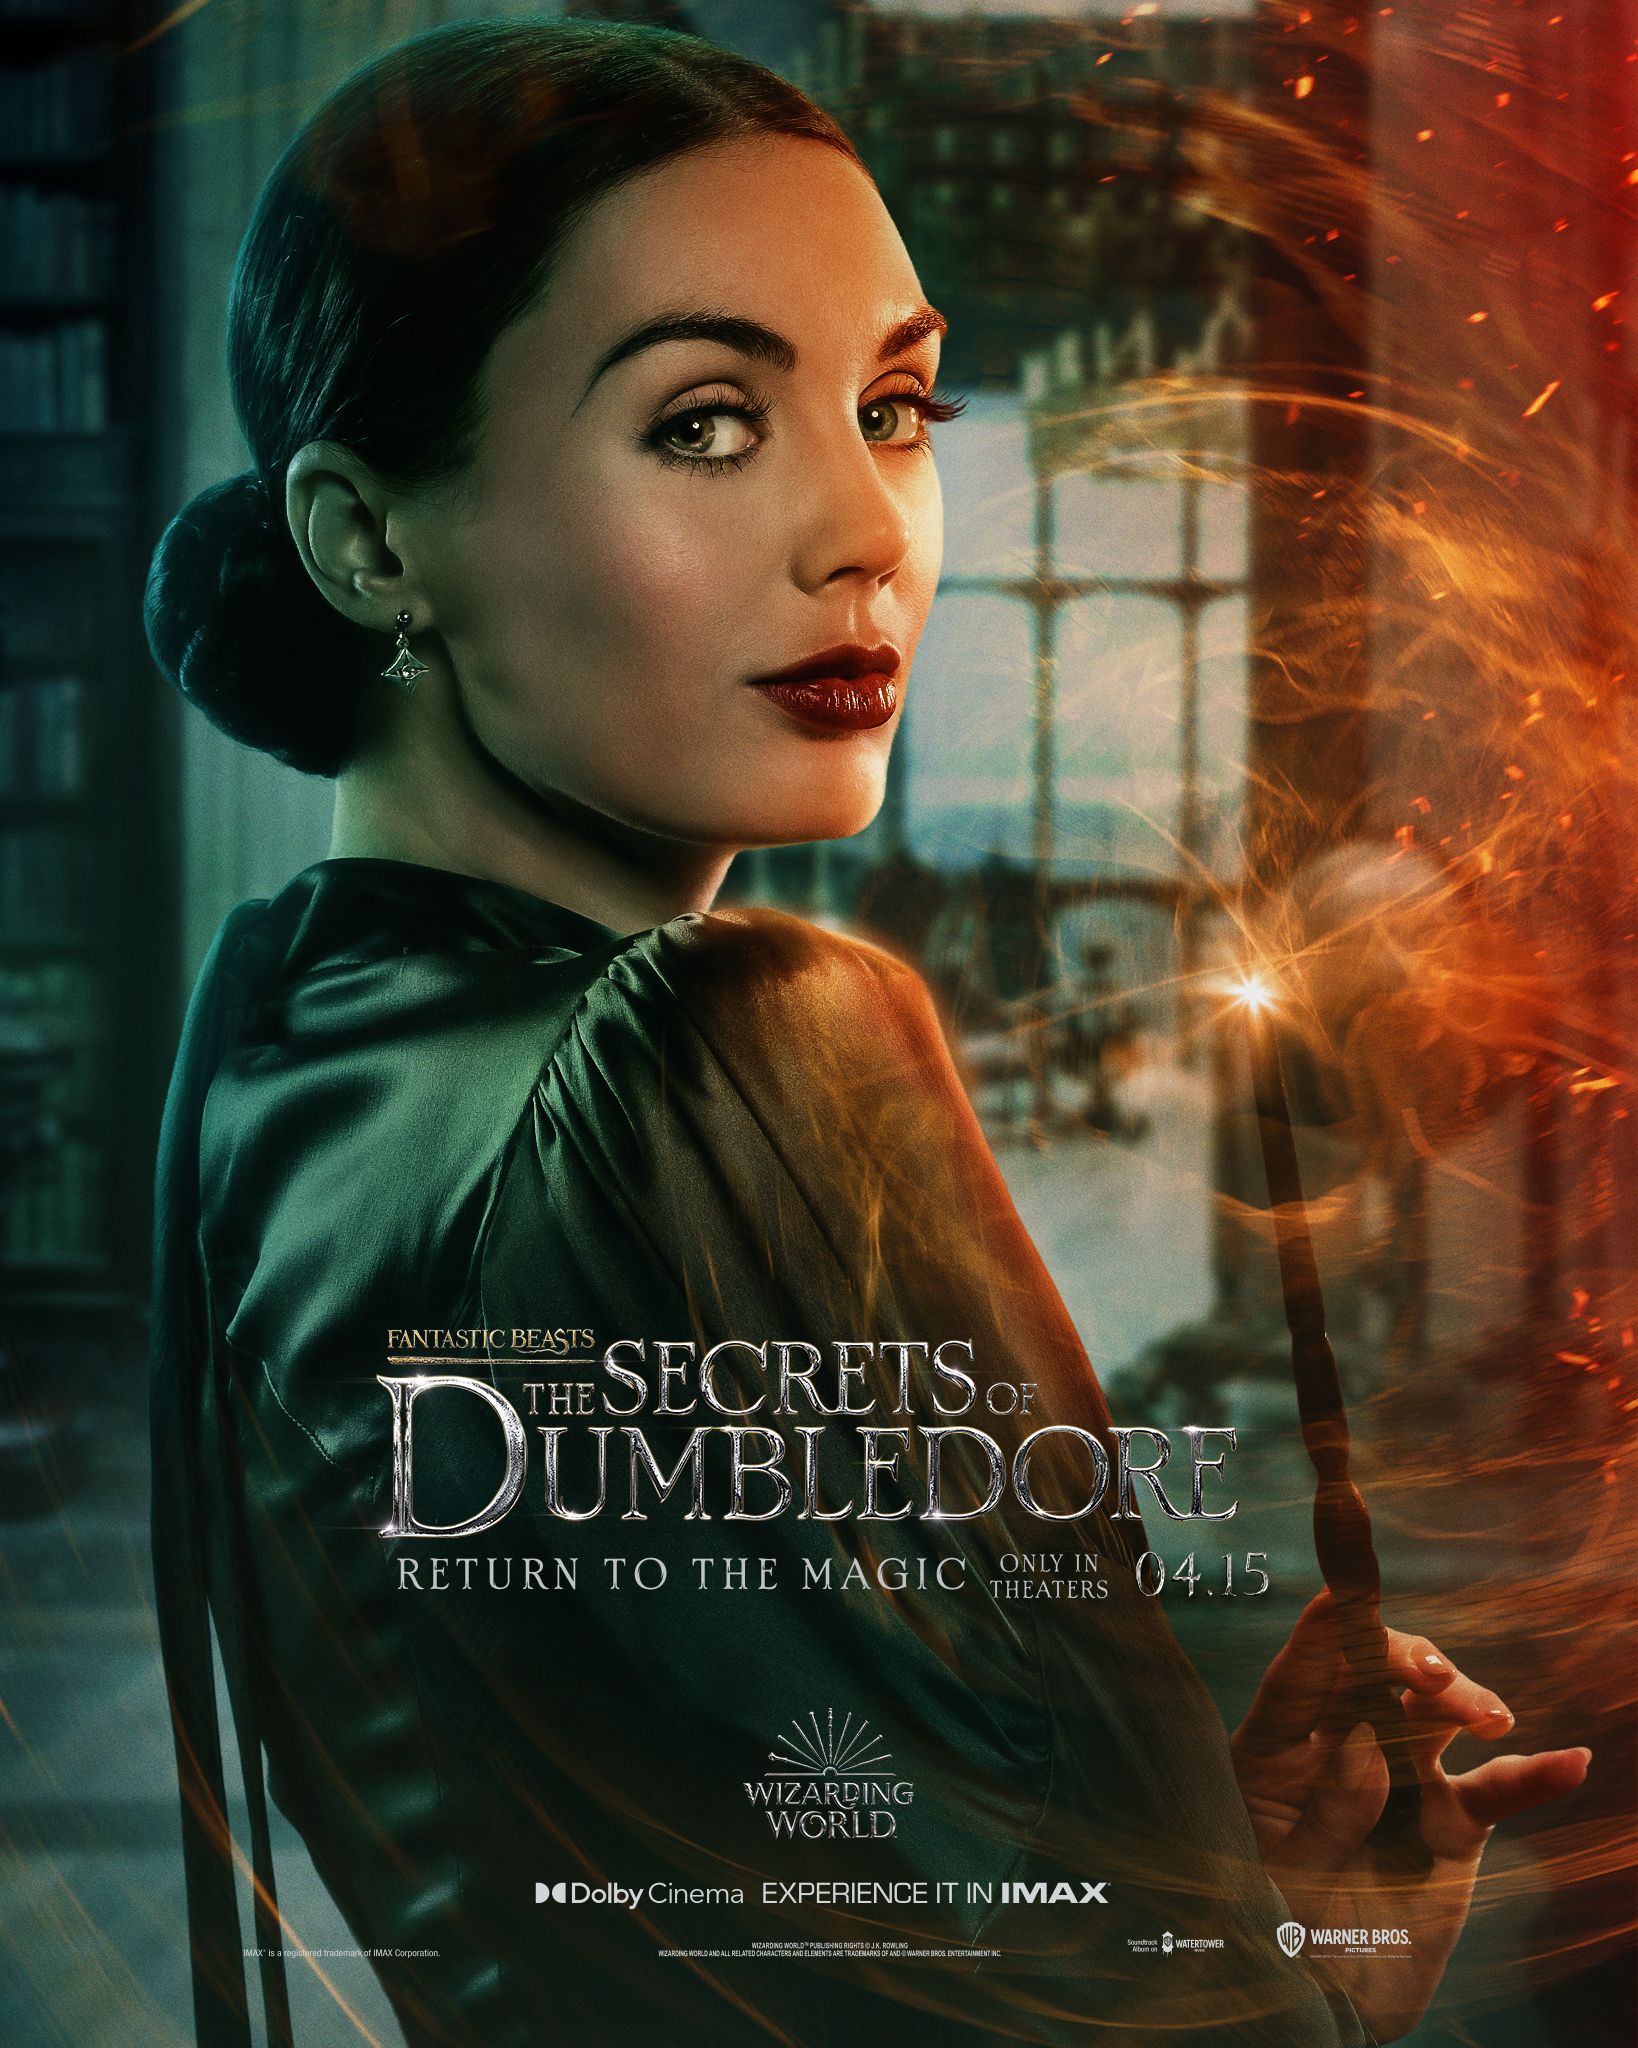 fantastic beasts character posters poppy corby-tuech